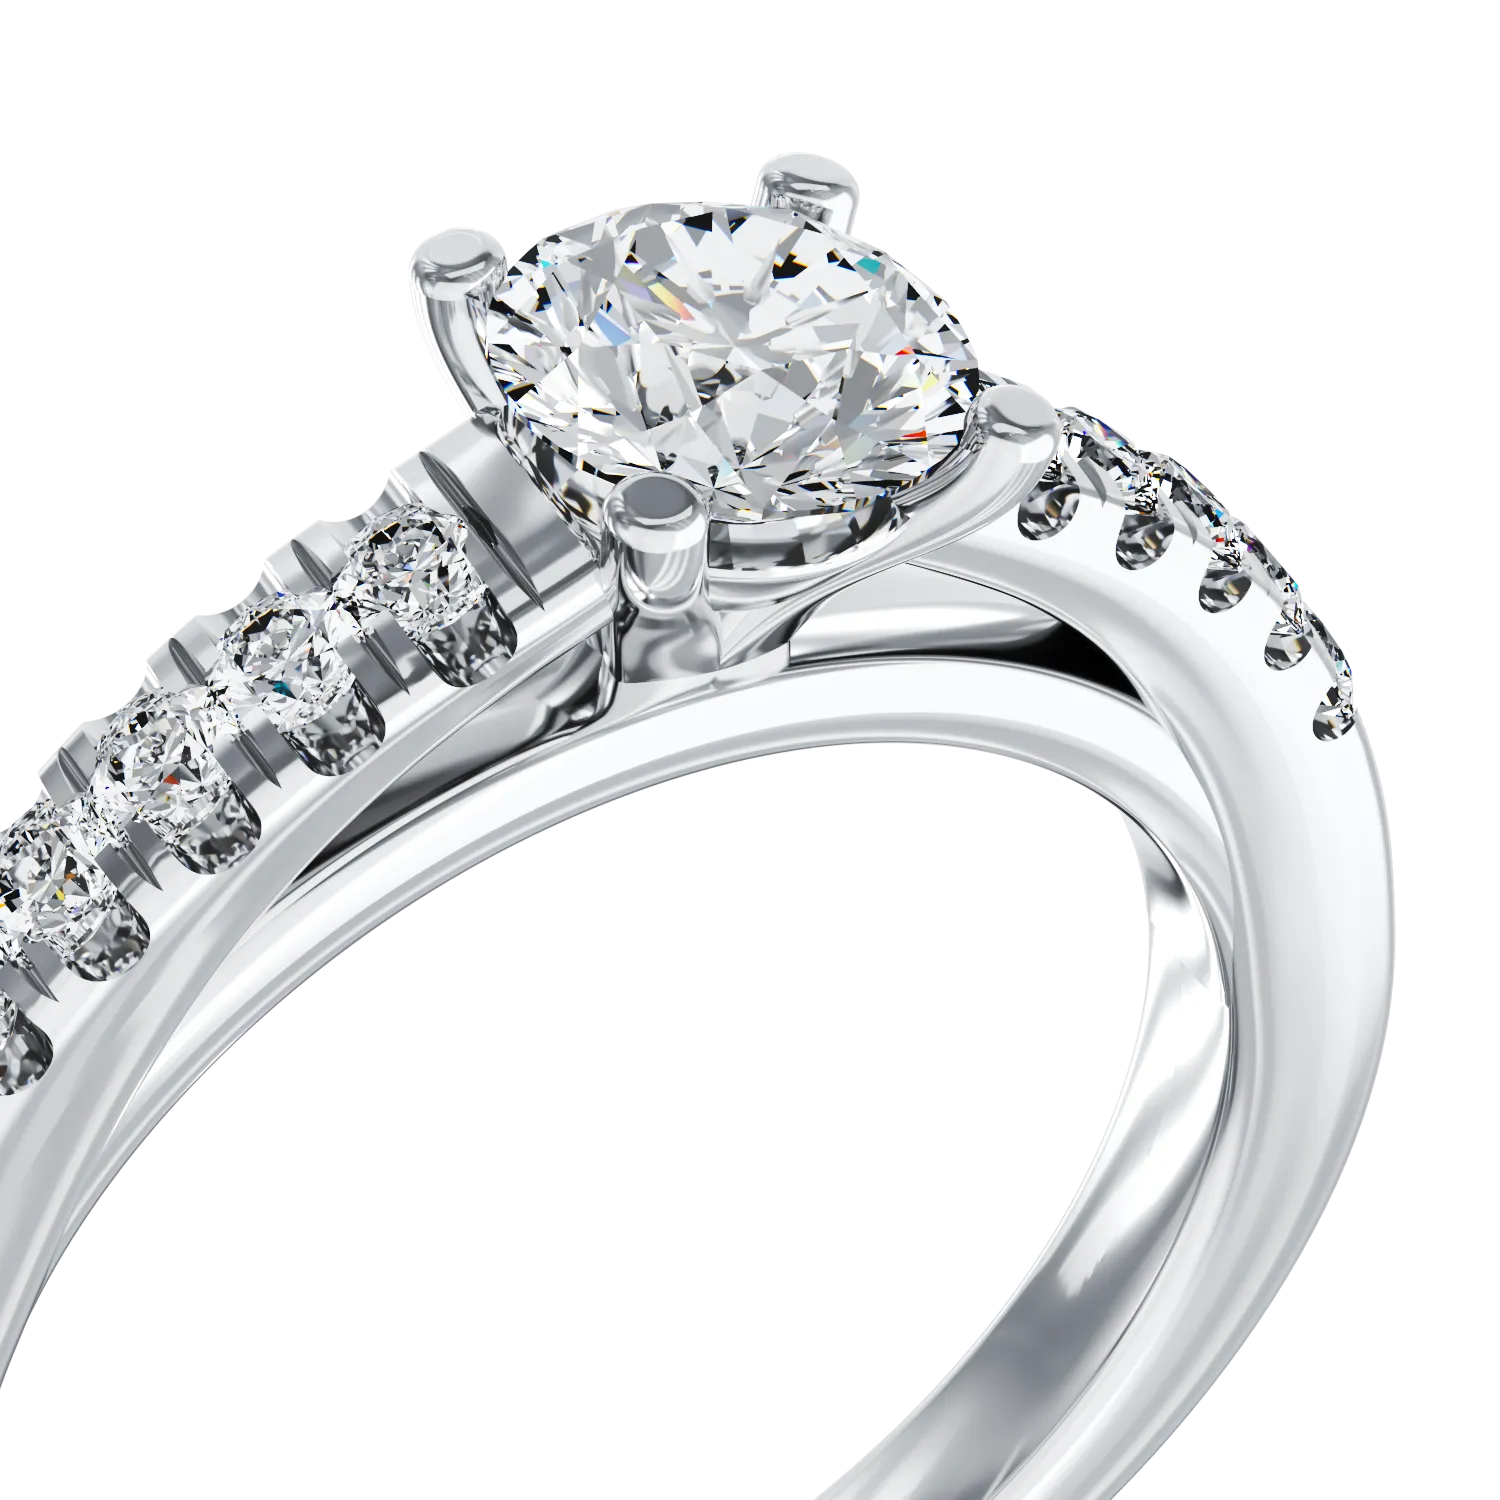 18K white gold engagement ring with 0.5ct diamond and 0.15ct diamonds